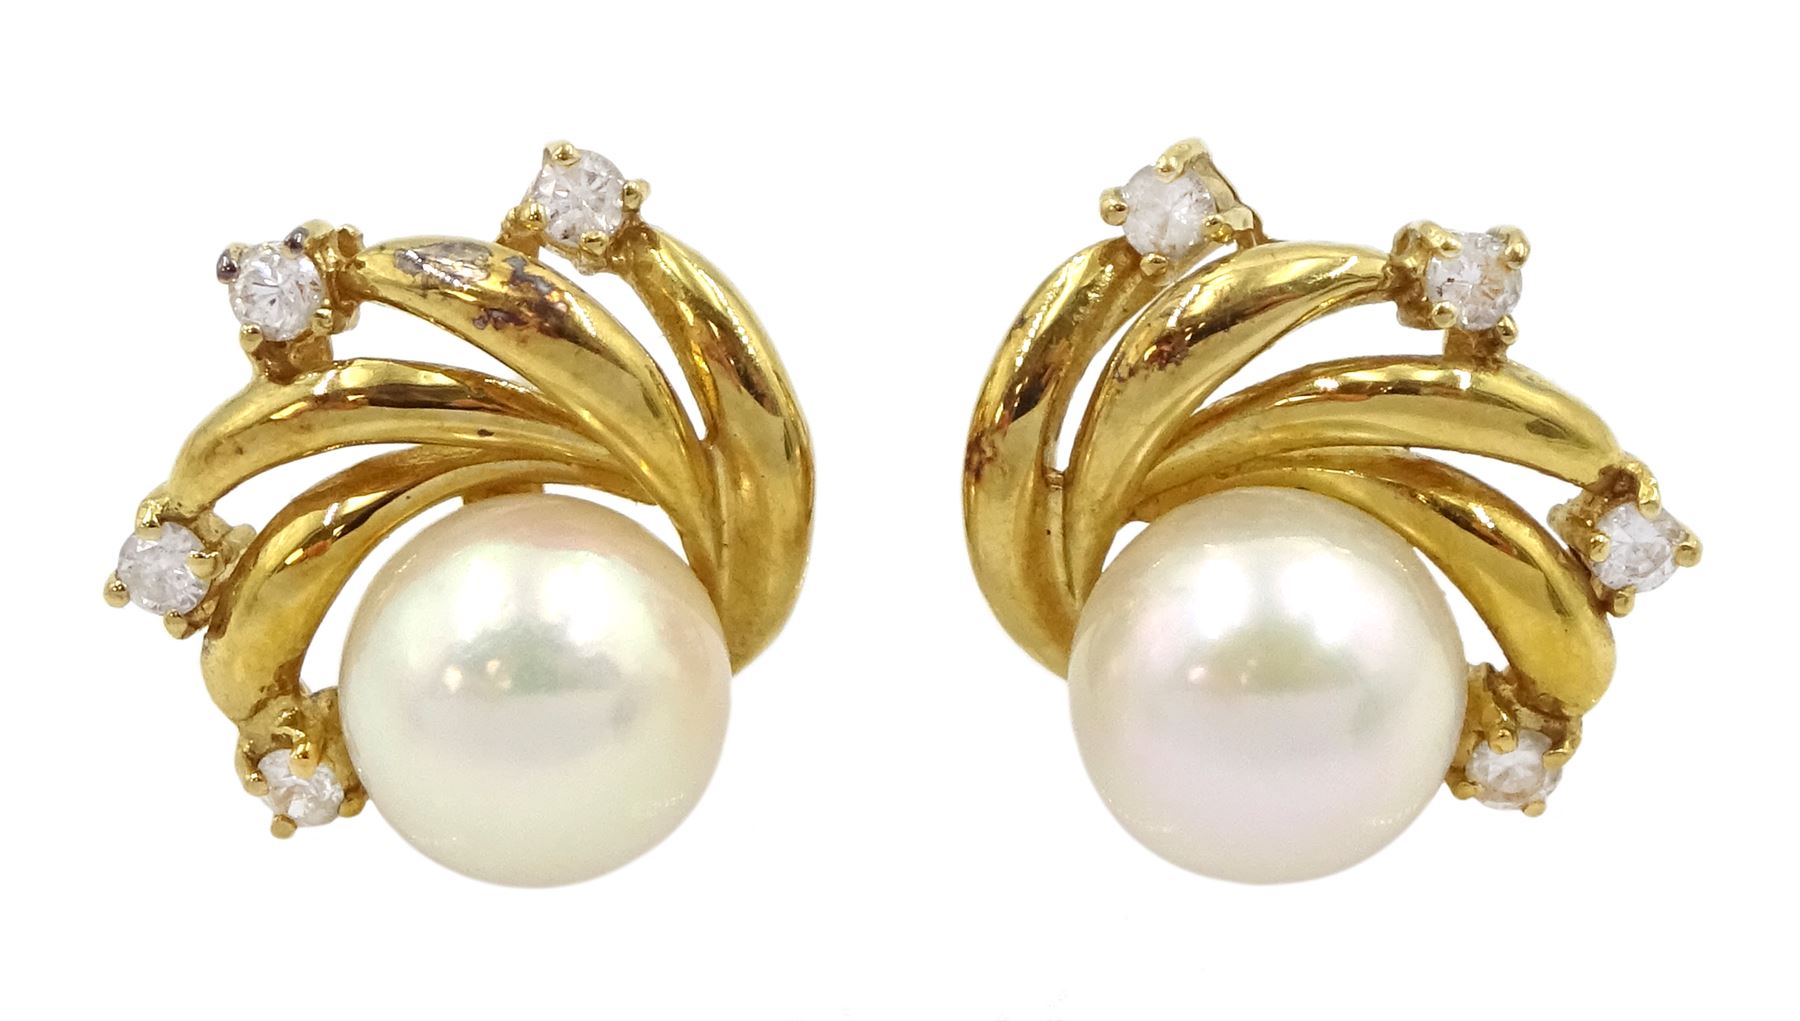 Pair of 18ct gold pearl and diamond stud earrings